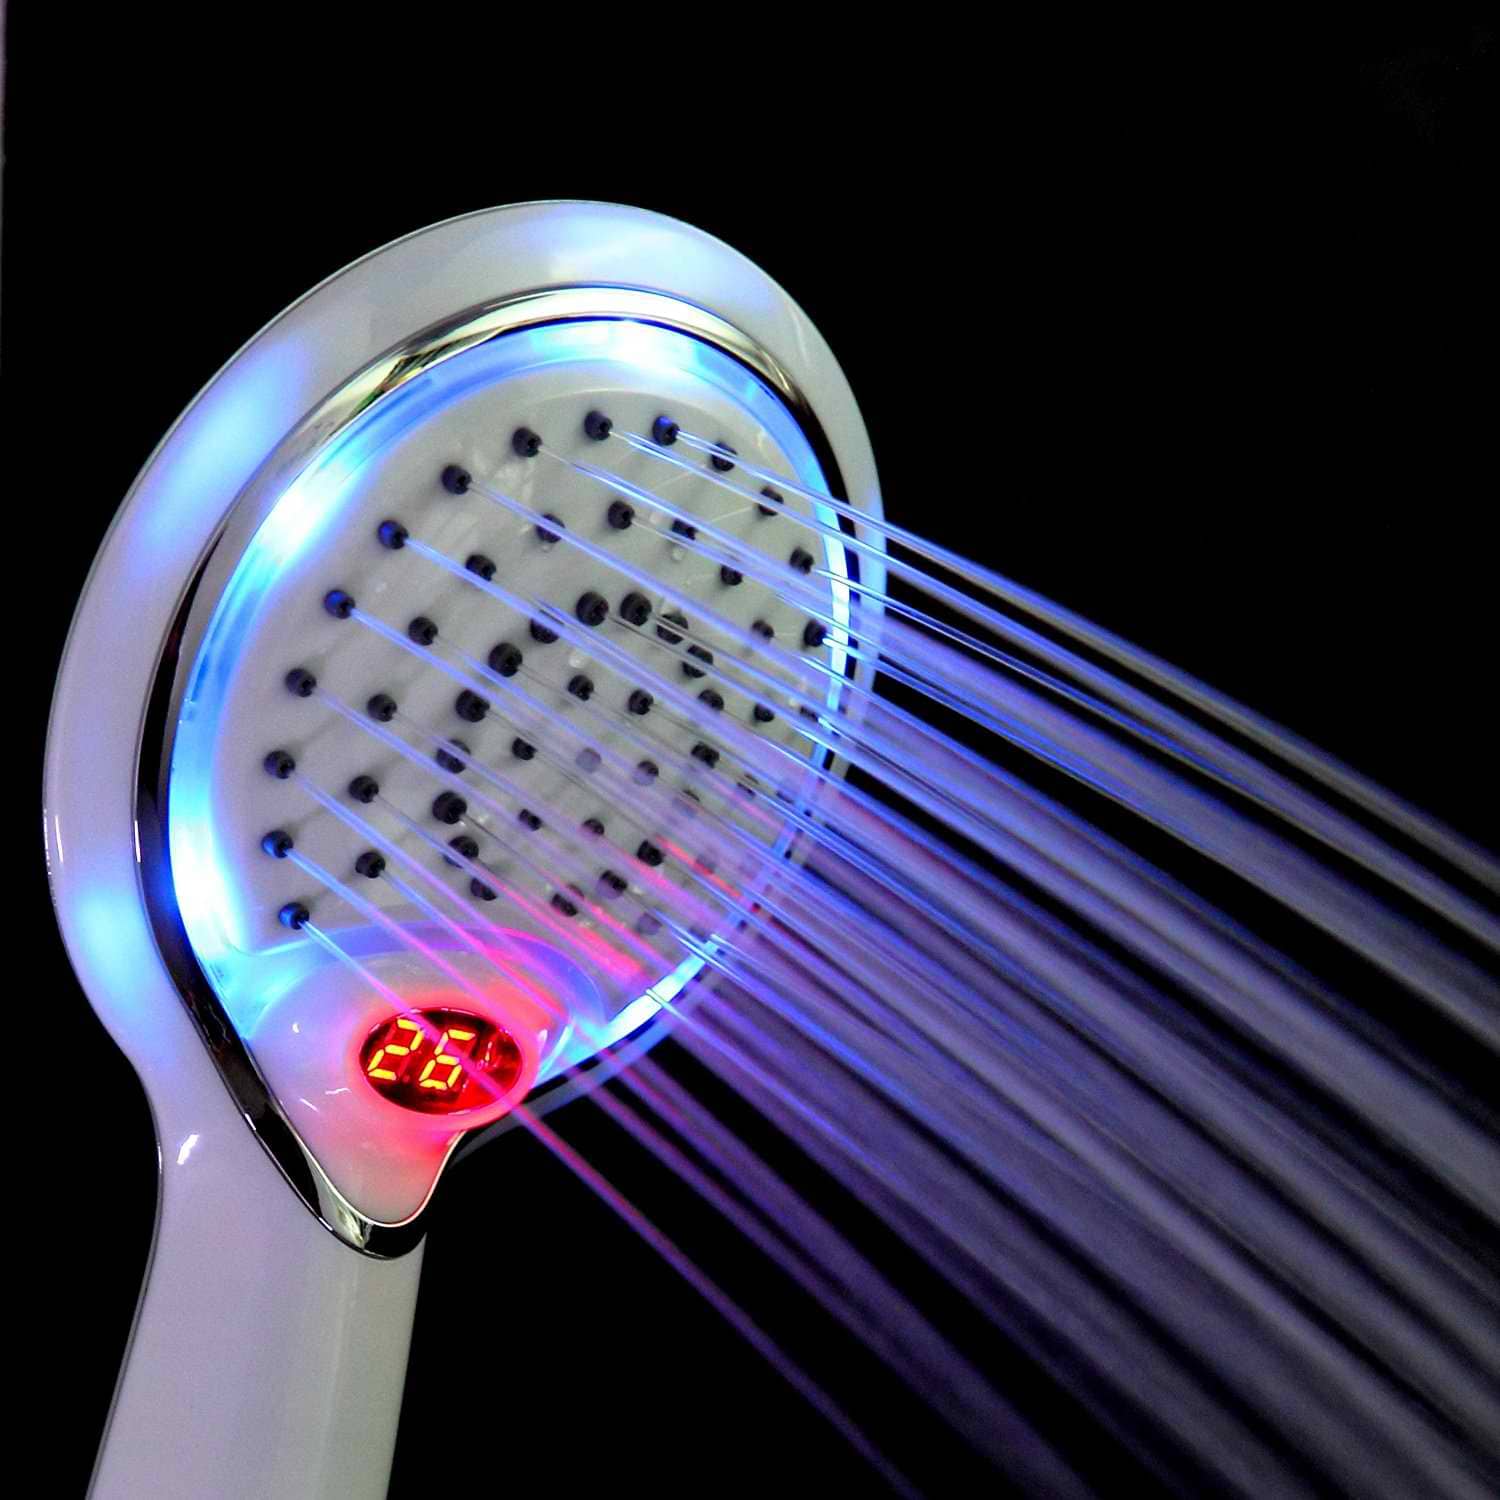 How To Get The LED Showerhead To Work